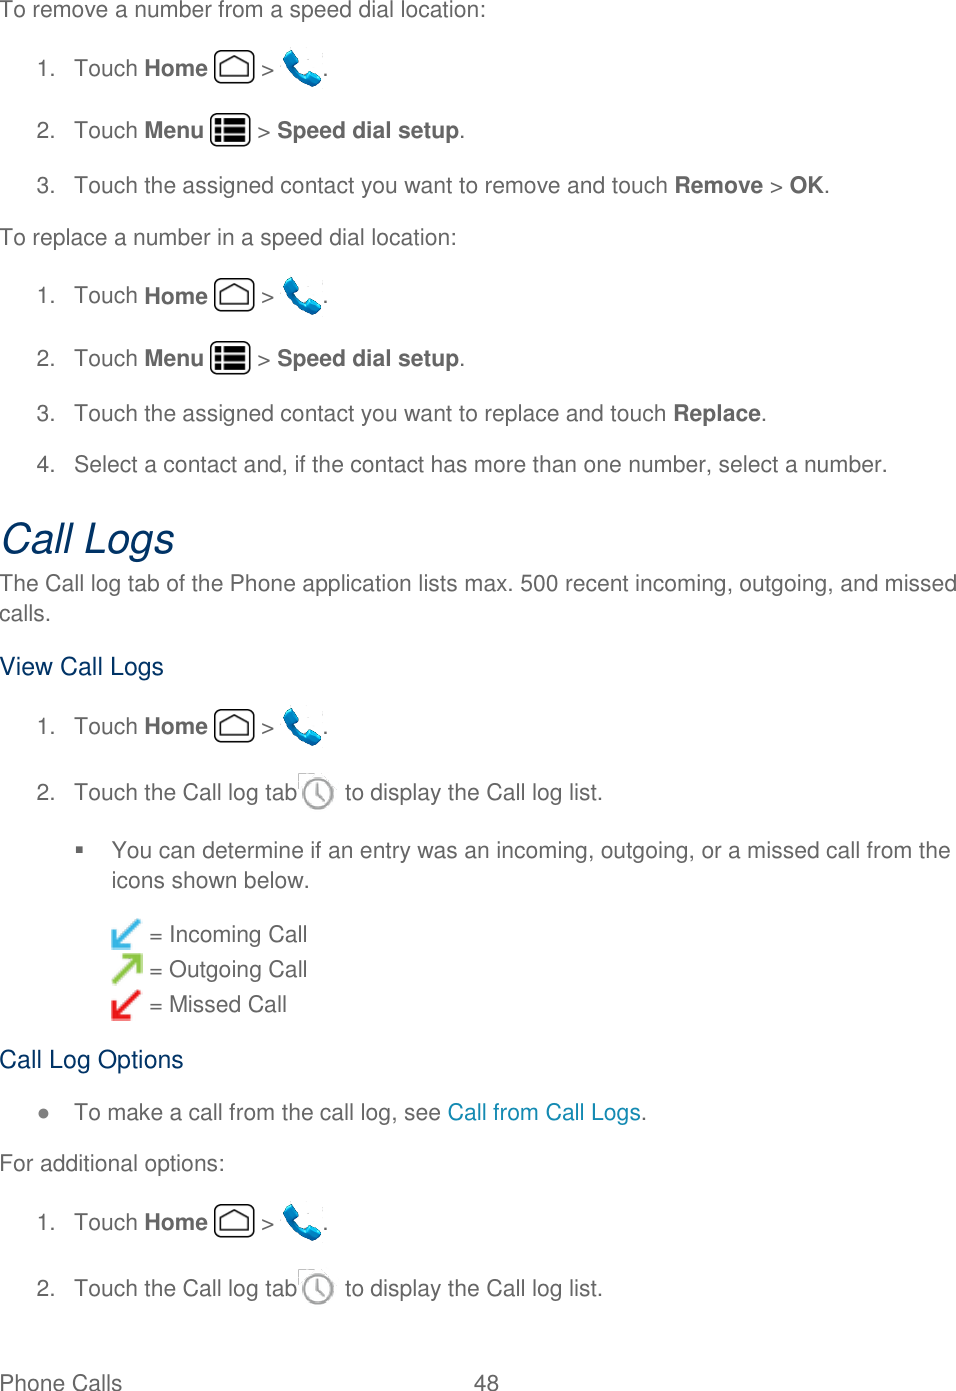 Phone Calls  48   To remove a number from a speed dial location:  1.  Touch Home   &gt;  . 2.  Touch Menu   &gt; Speed dial setup. 3.  Touch the assigned contact you want to remove and touch Remove &gt; OK. To replace a number in a speed dial location:  1.  Touch Home   &gt;  . 2.  Touch Menu   &gt; Speed dial setup. 3.  Touch the assigned contact you want to replace and touch Replace. 4.  Select a contact and, if the contact has more than one number, select a number. Call Logs The Call log tab of the Phone application lists max. 500 recent incoming, outgoing, and missed calls. View Call Logs 1.  Touch Home   &gt;  . 2.  Touch the Call log tab  to display the Call log list.   You can determine if an entry was an incoming, outgoing, or a missed call from the icons shown below.  = Incoming Call  = Outgoing Call  = Missed Call Call Log Options ● To make a call from the call log, see Call from Call Logs. For additional options: 1.  Touch Home   &gt;  . 2.  Touch the Call log tab  to display the Call log list. 